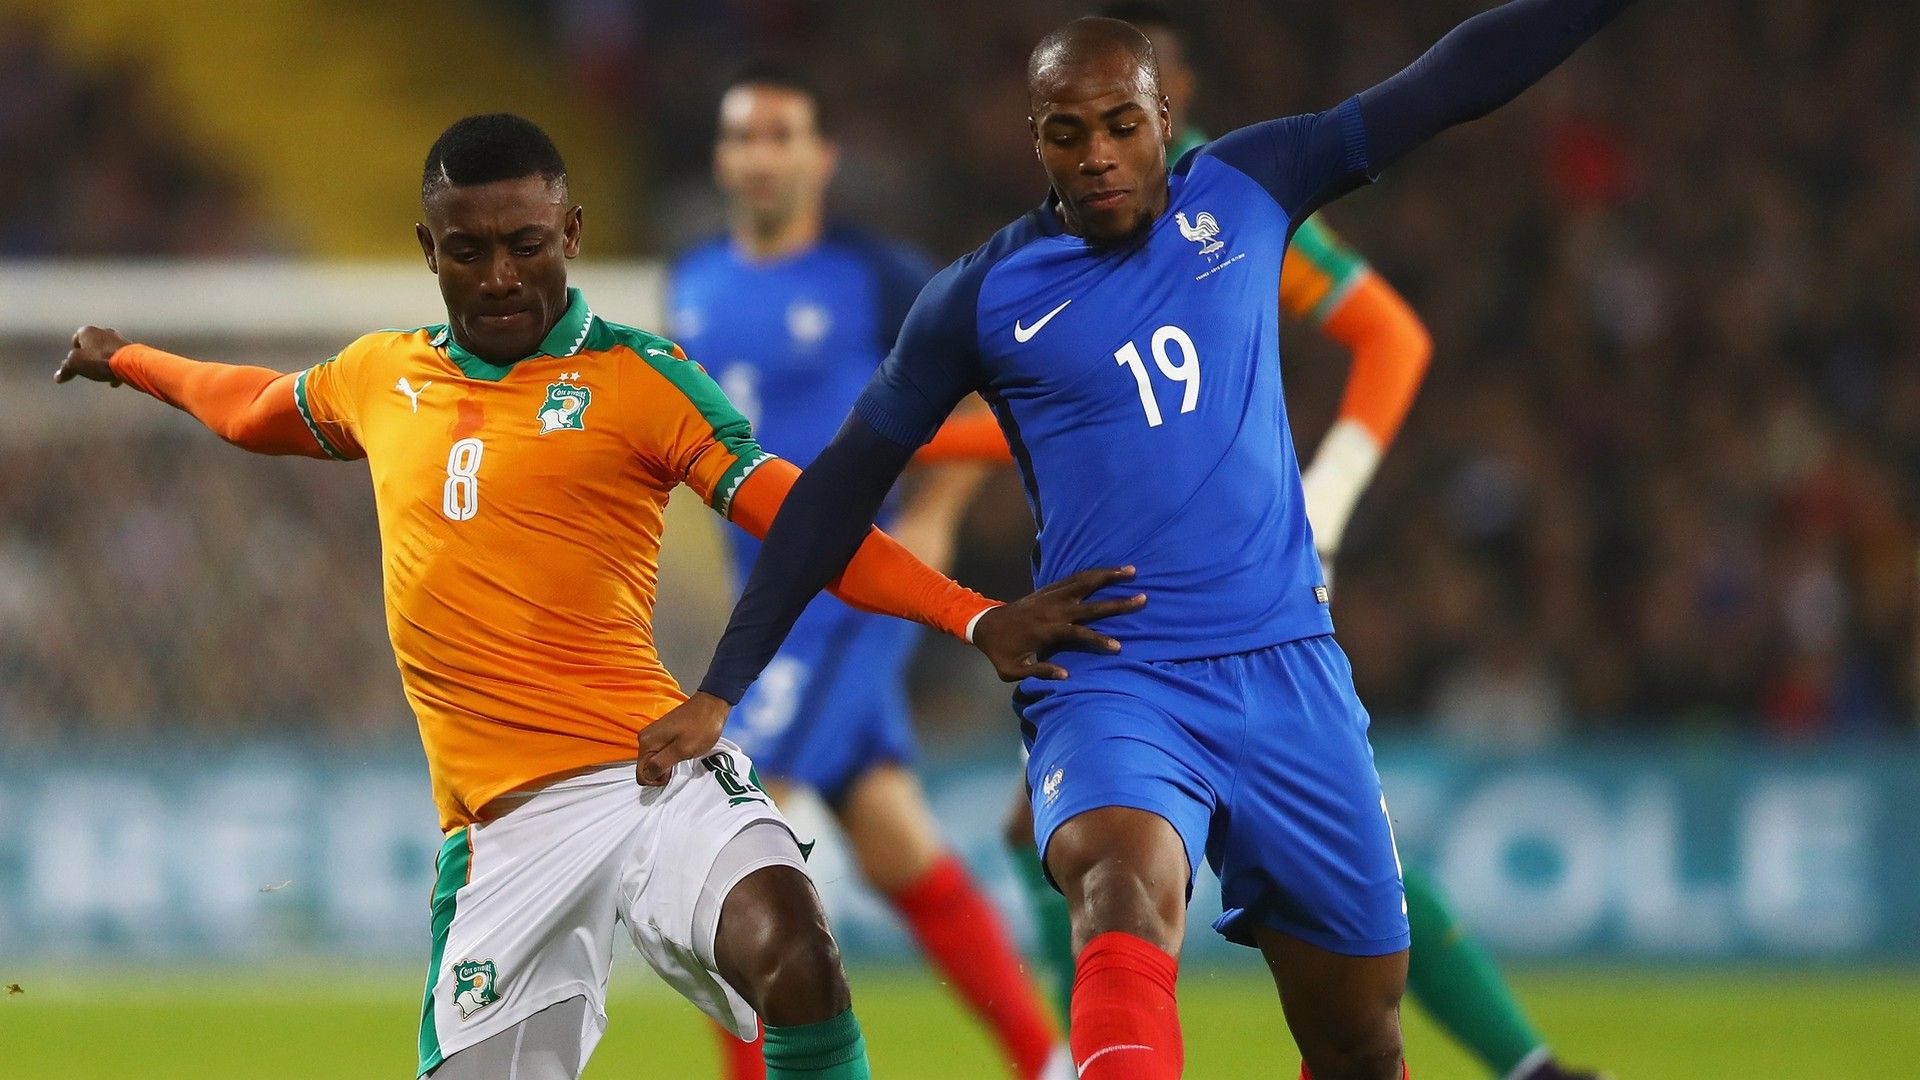 France vs Ivory Coast LIVE: When and where to watch International Friendlies live streaming? Latest Team News, Predicted Starting Lineups, Live Telecast and more